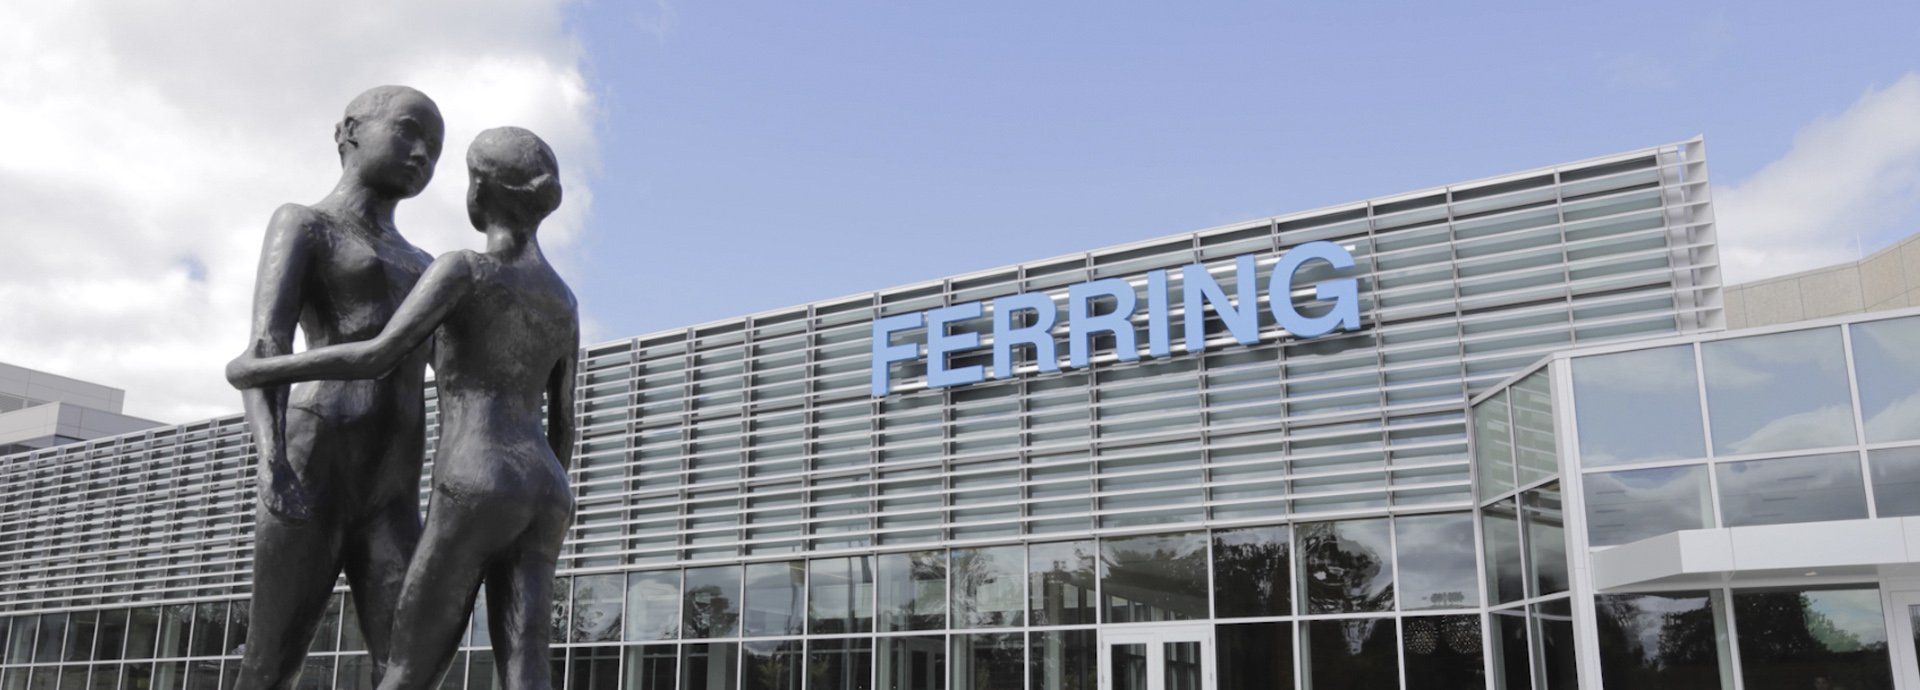 Ferring's research site closure signals shift from internal to external R&D, CSO says